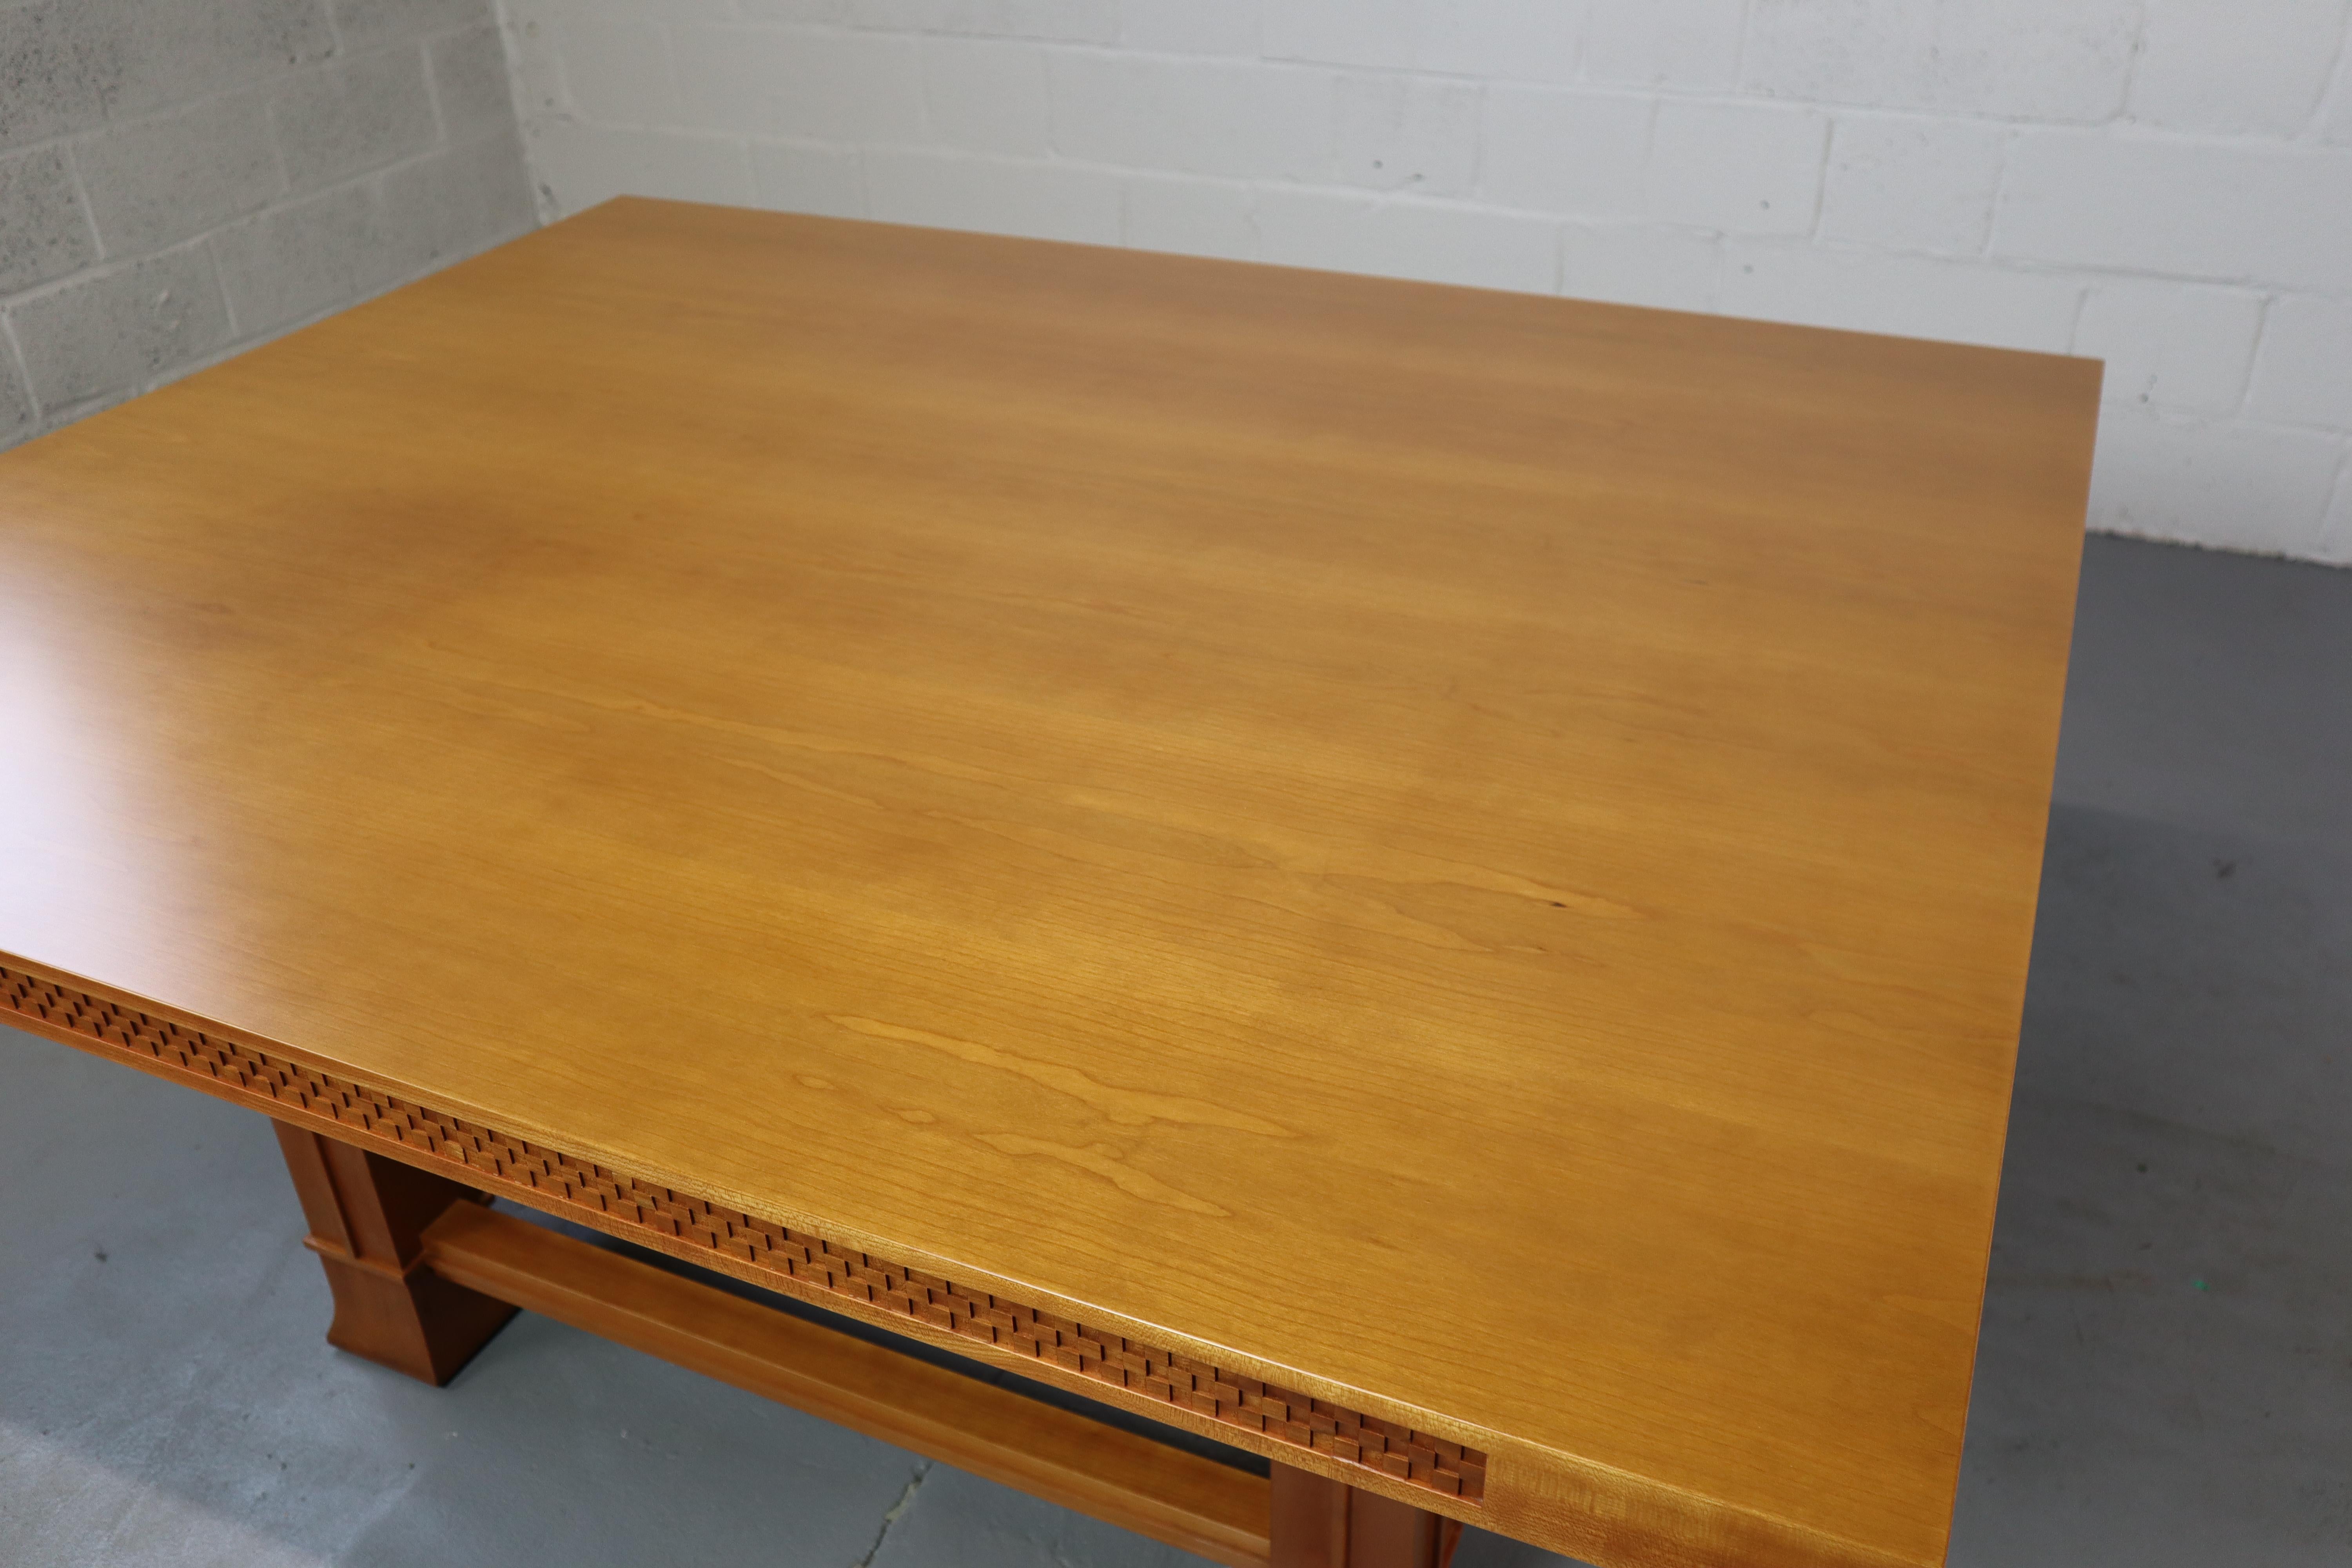 Italian Husser 615 dining table by Frank Lloyd Wright and manufactured by Cassina